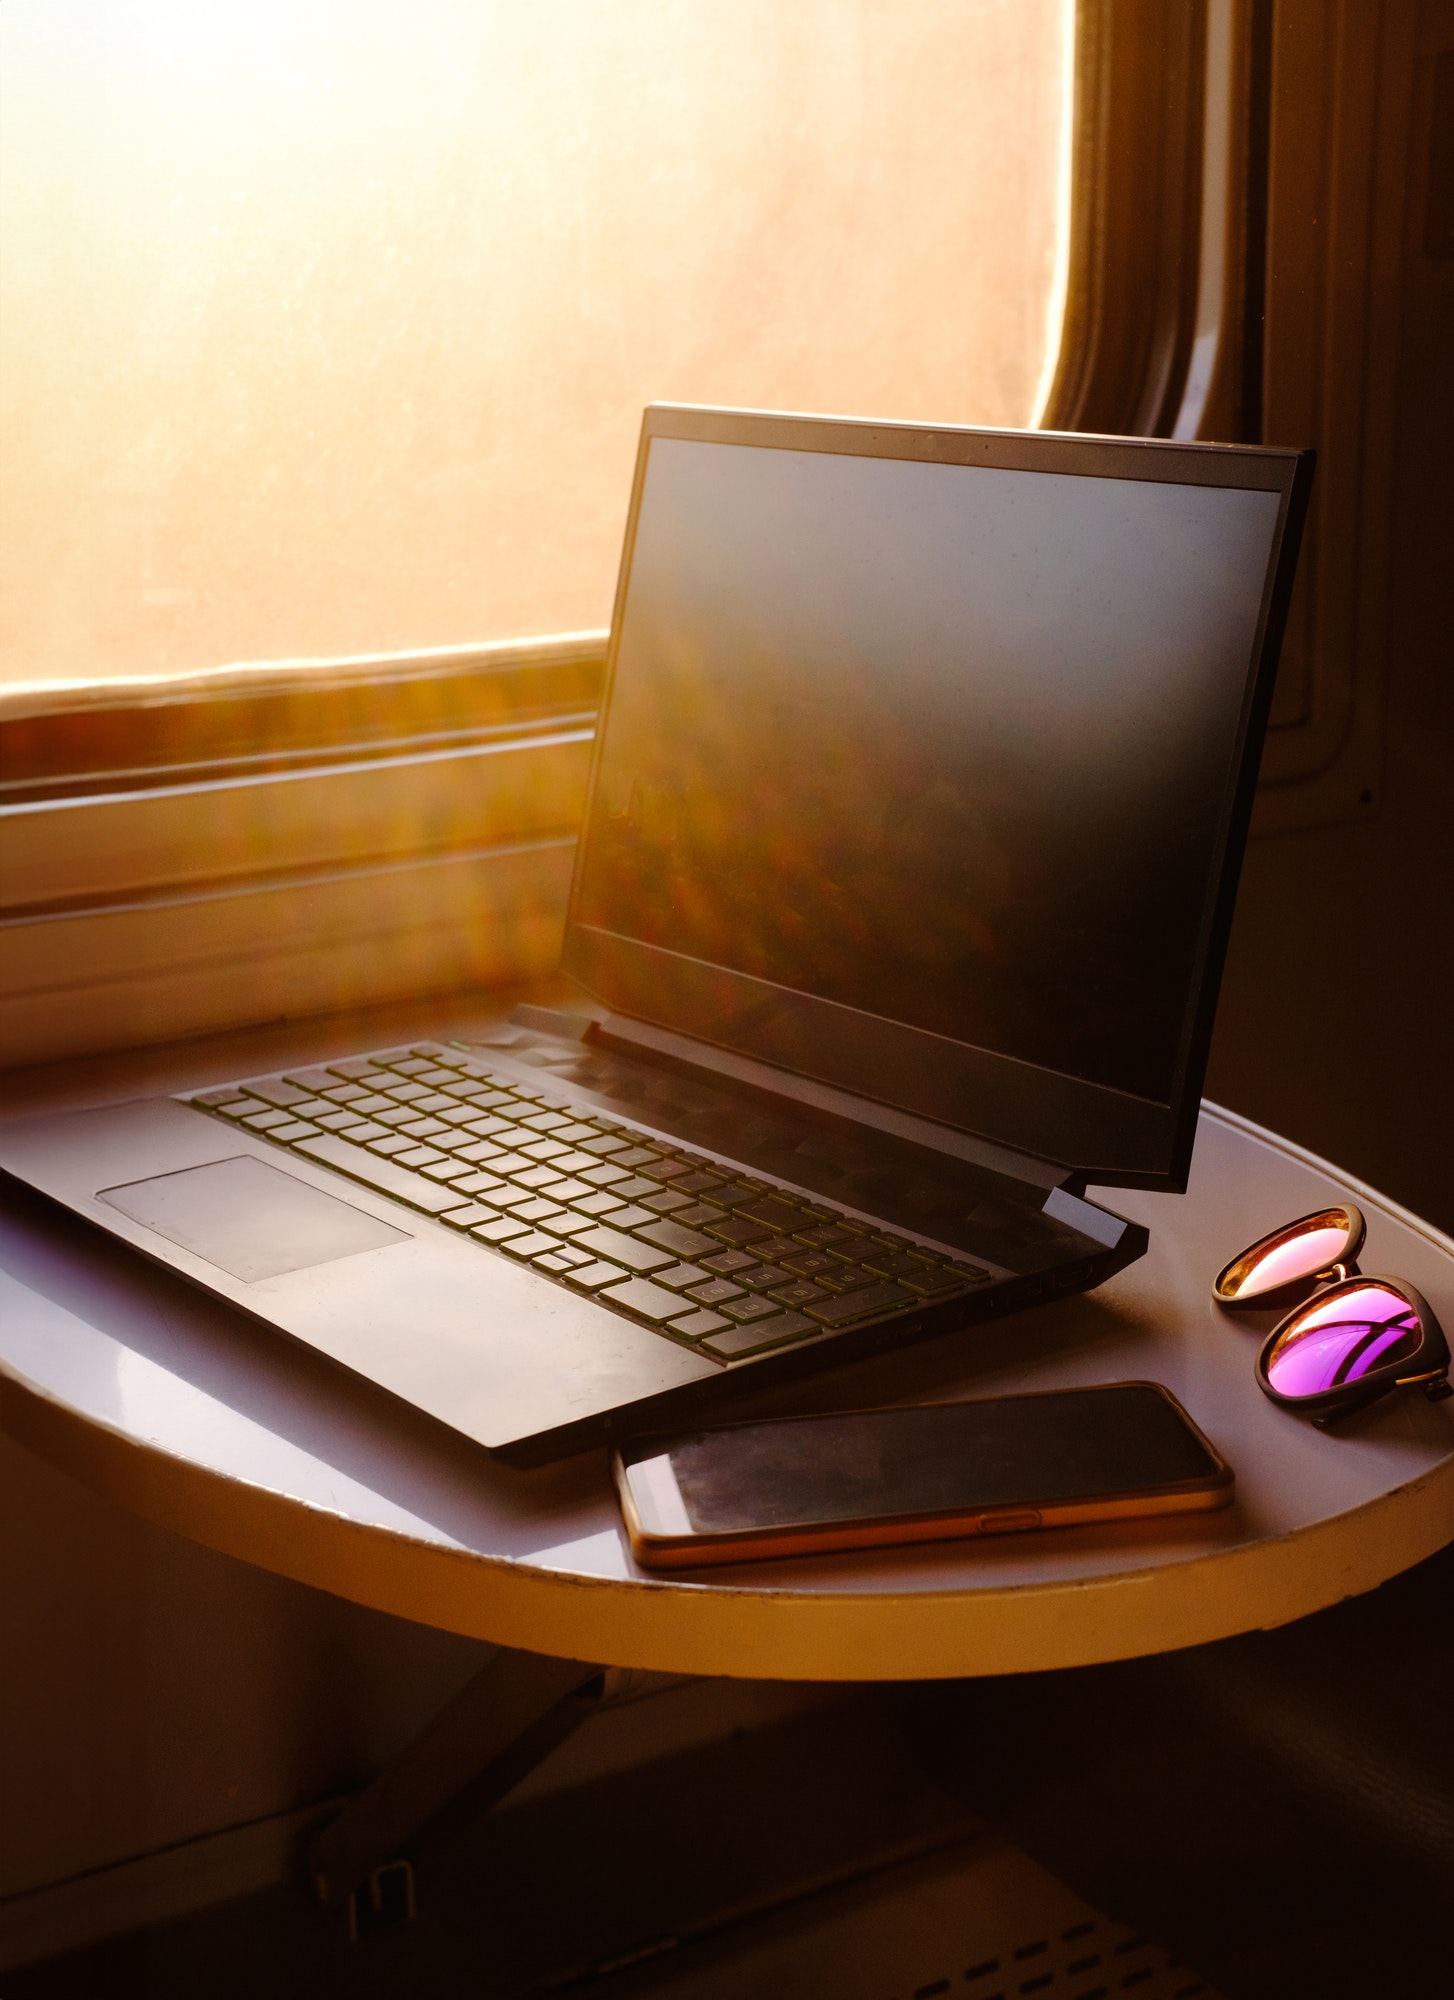 Laptop in train on the table by the window. Business trip